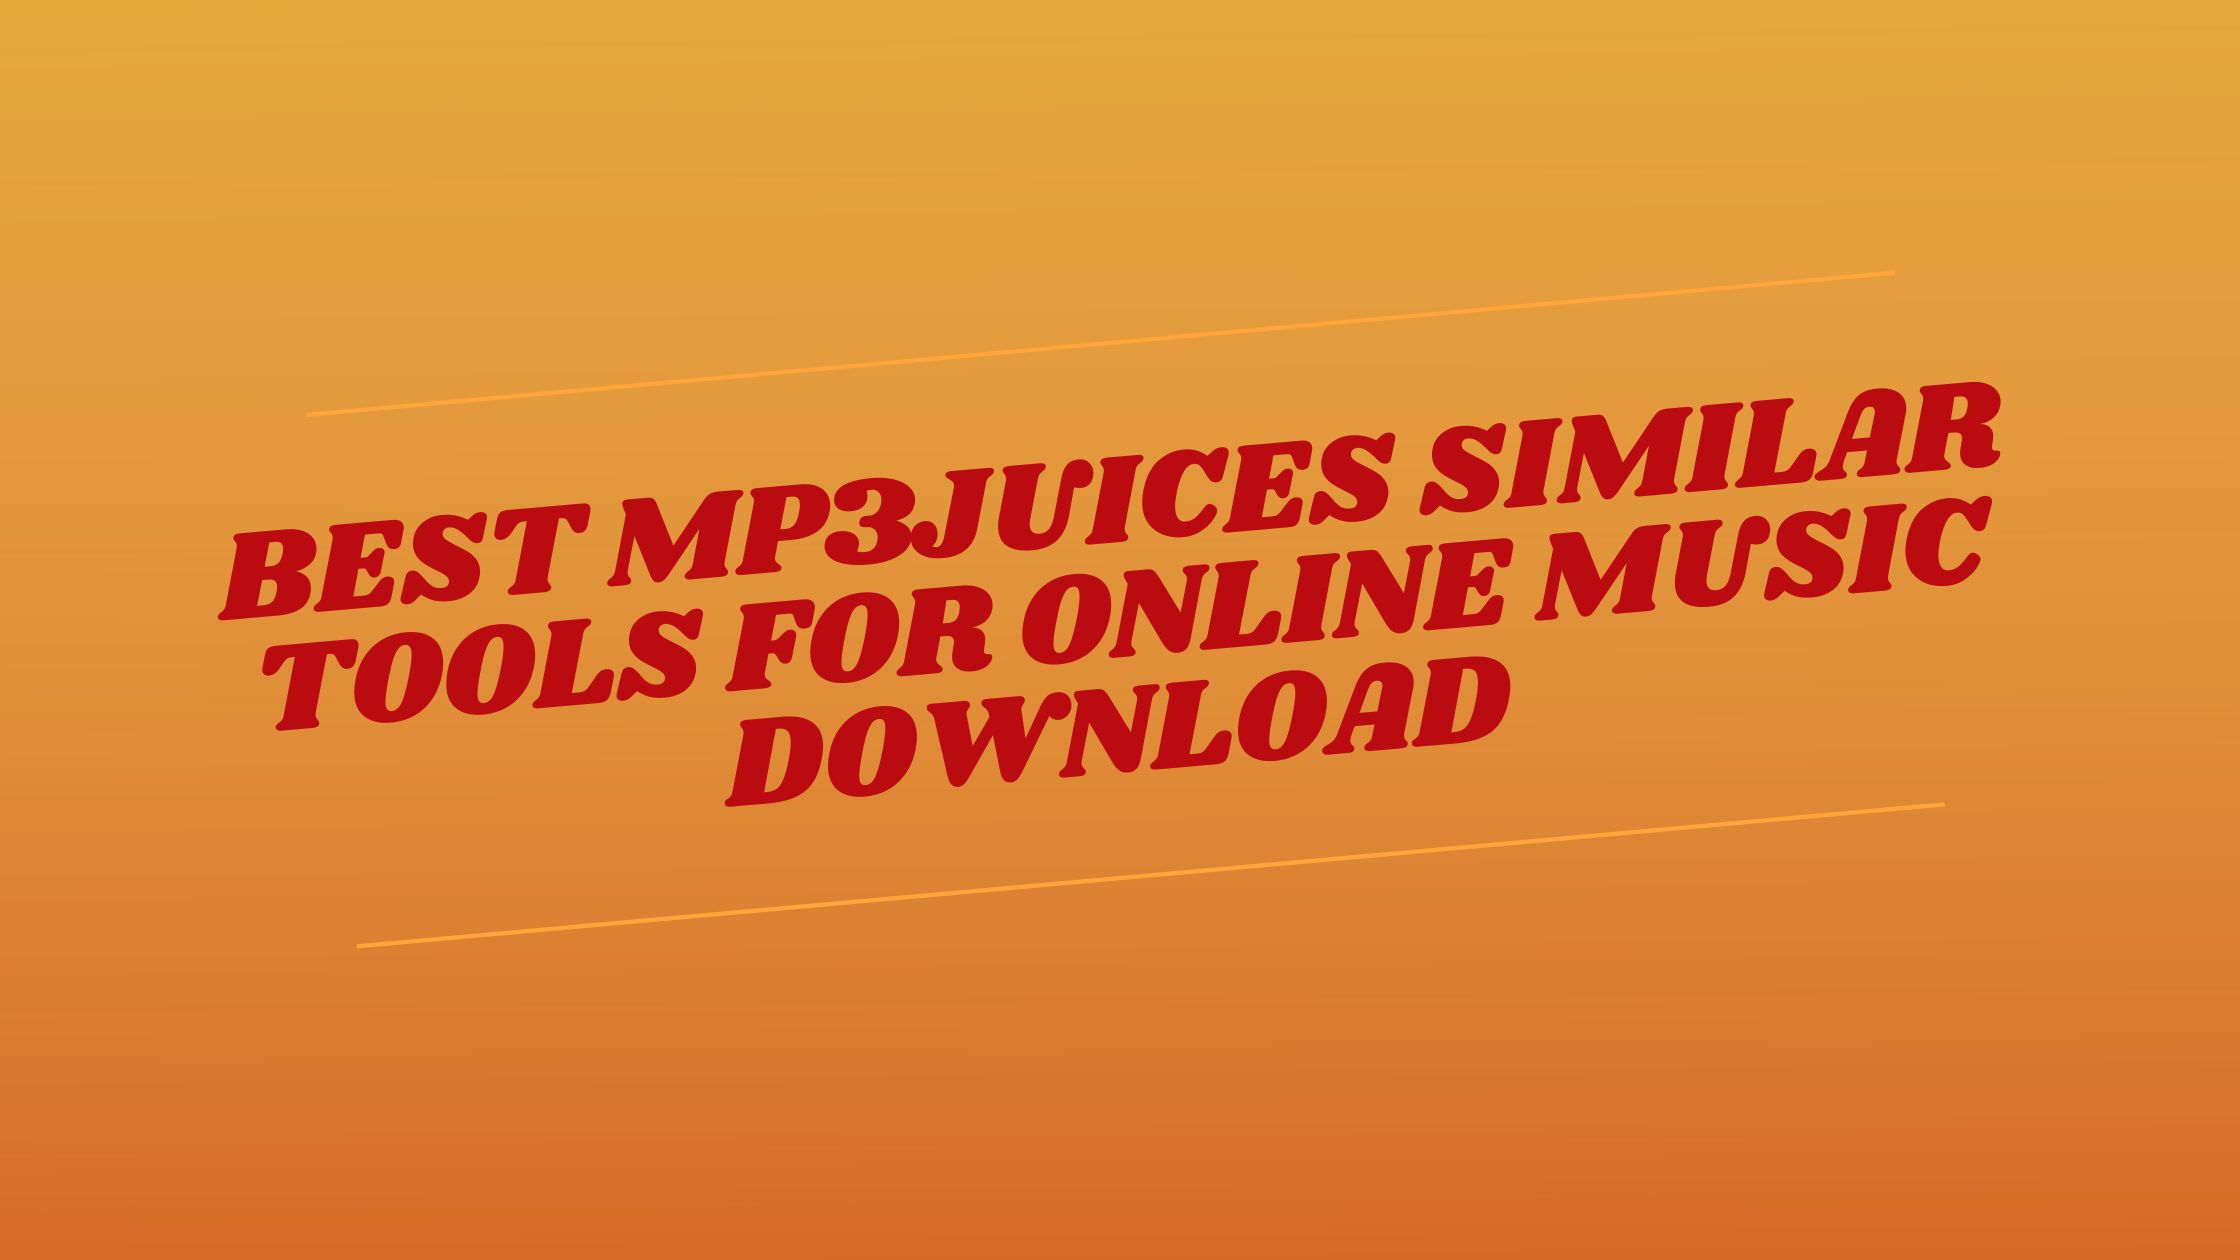 Best MP3Juices Similar Tools for Online Music Download